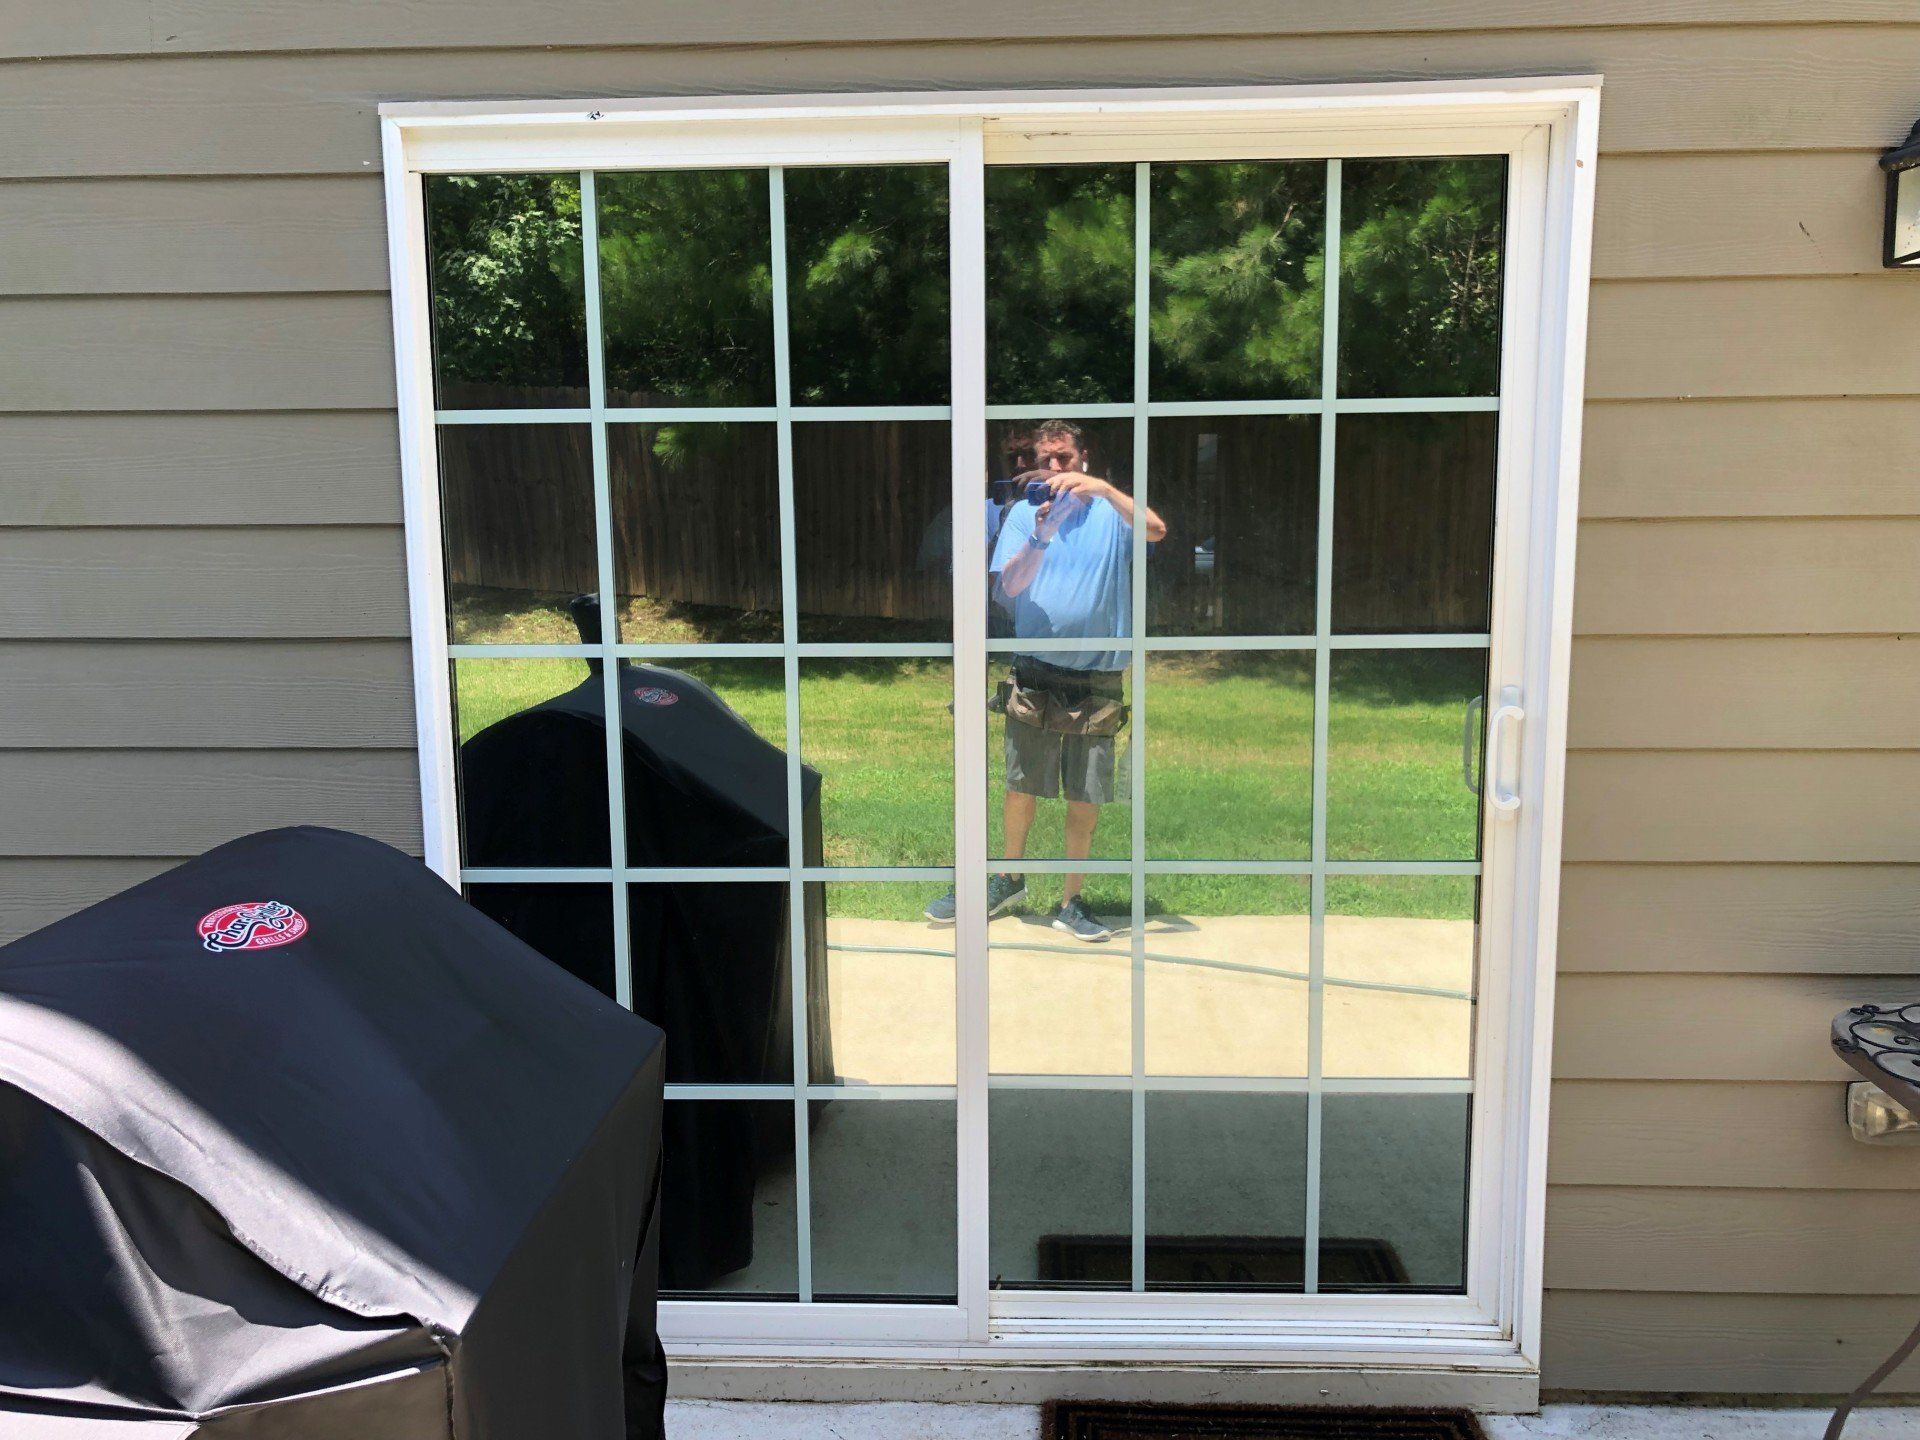 Residential Tint installed on 6/21/2019 - Home window tinting service in Phenix City, AL